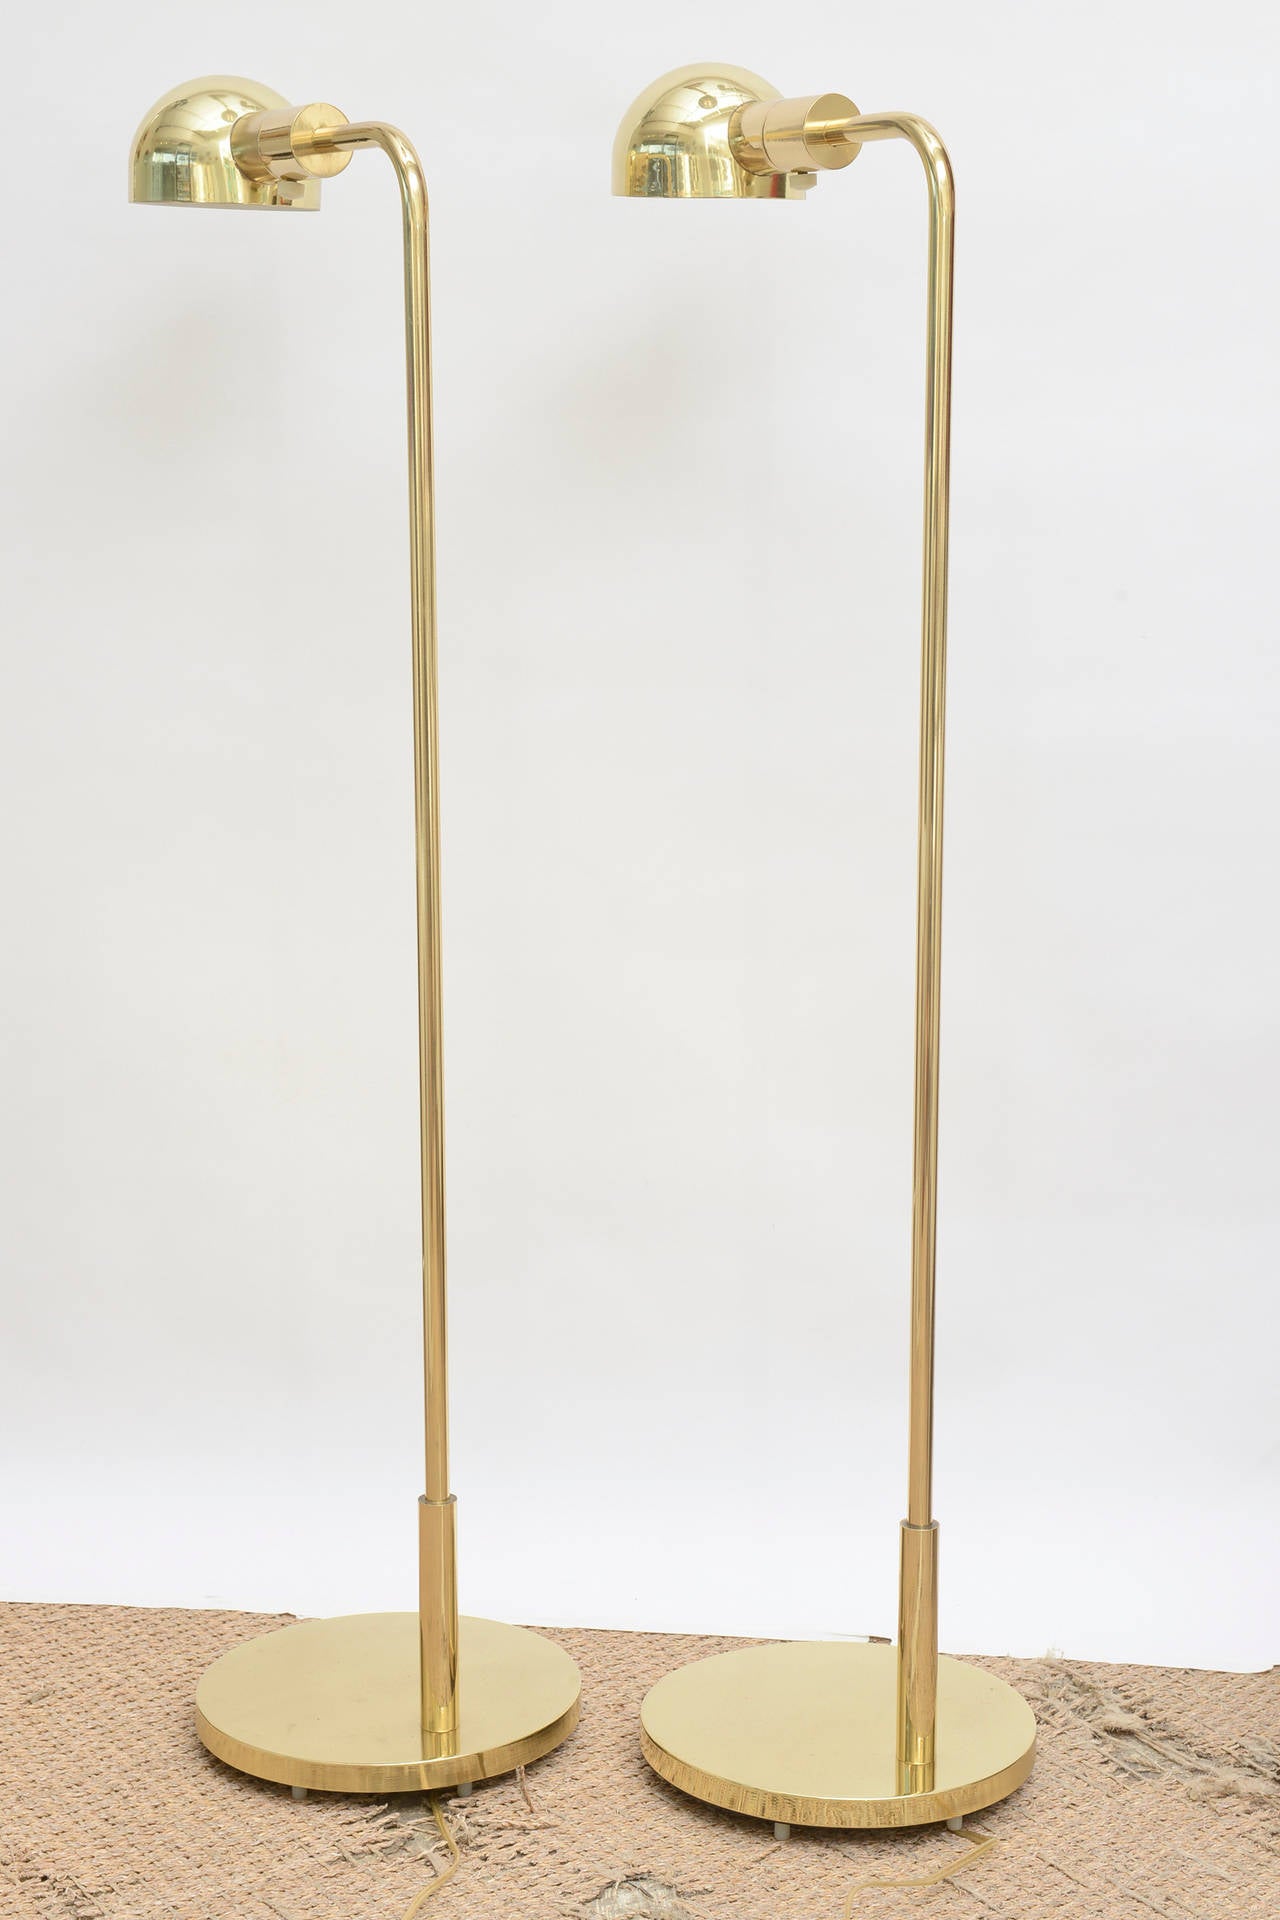 Pair of Polished Brass Casella Domed Floor Lamps/ SATURDAY SALE 2